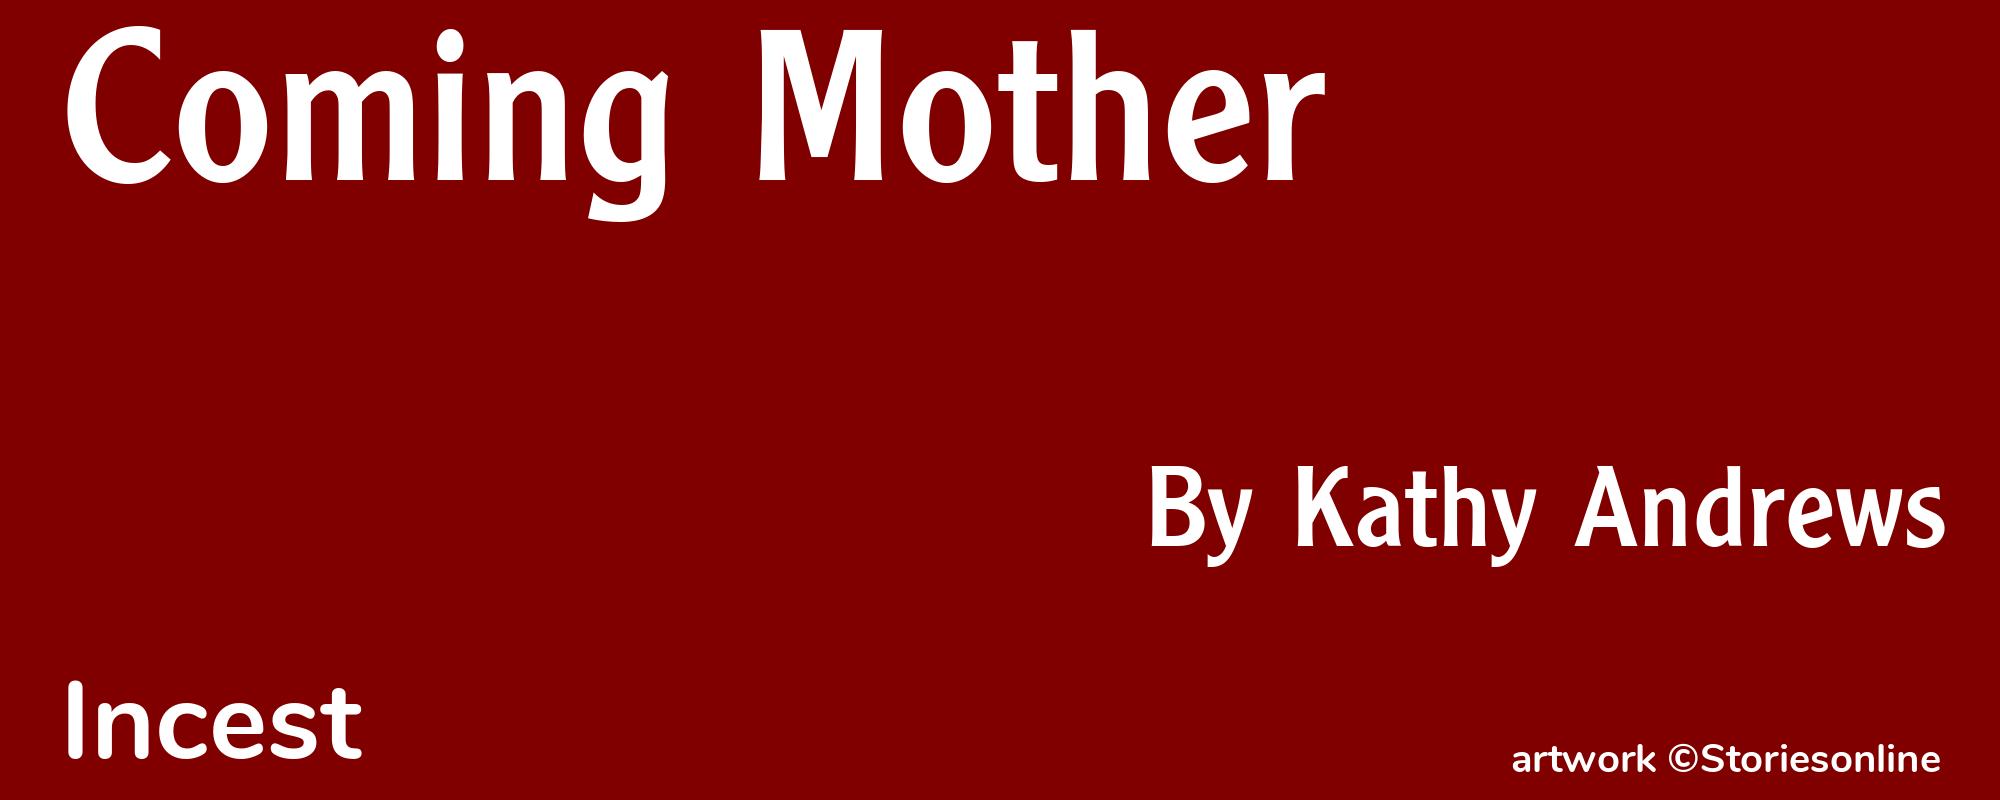 Coming Mother - Cover